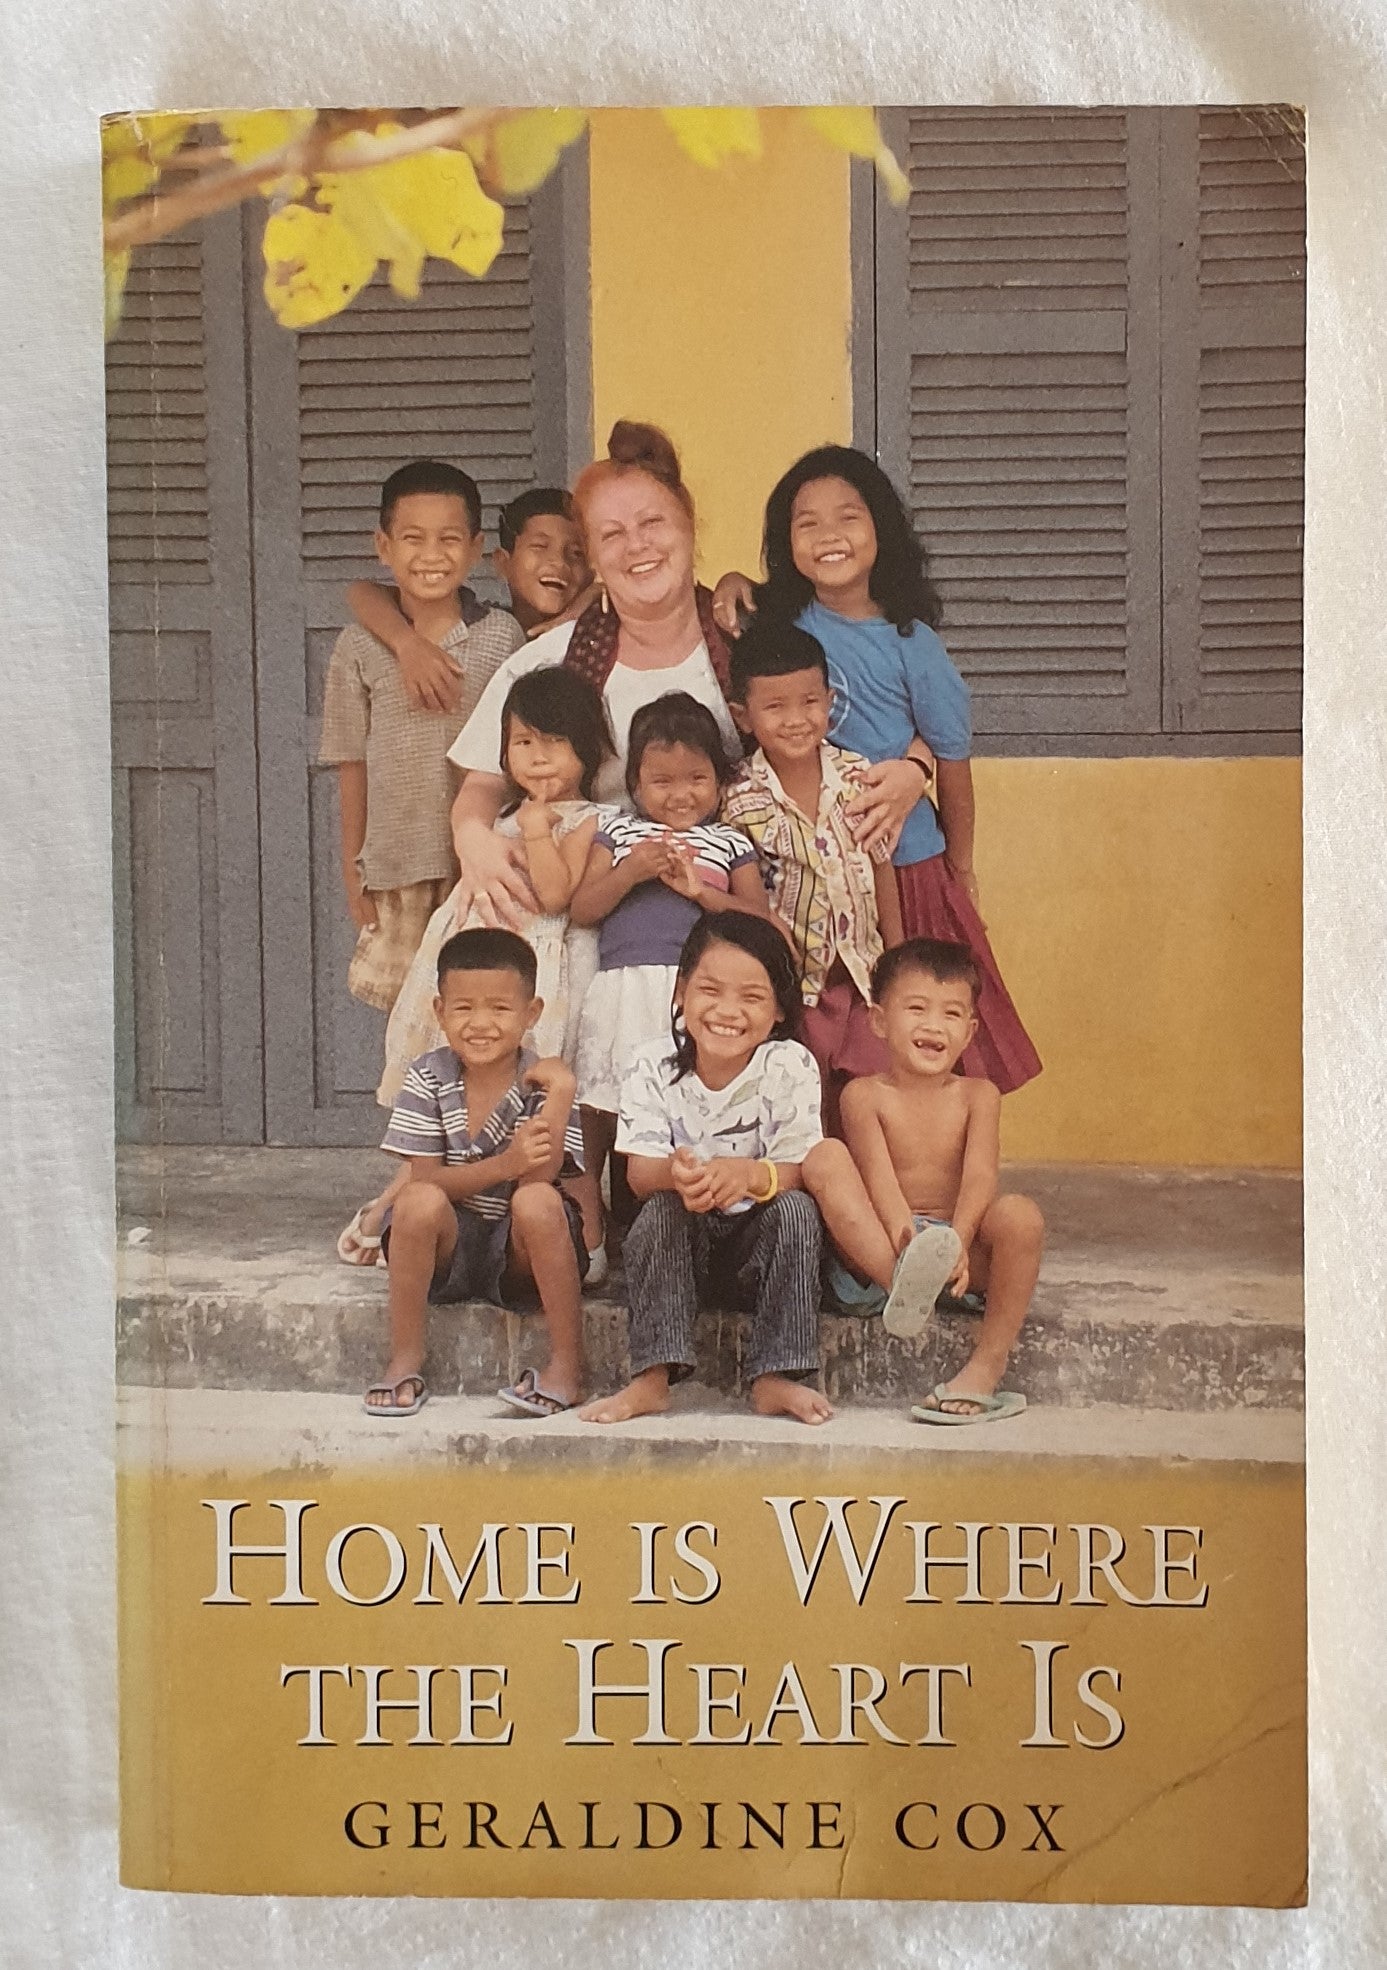 Home Is Where the Heart Is by Geraldine Cox